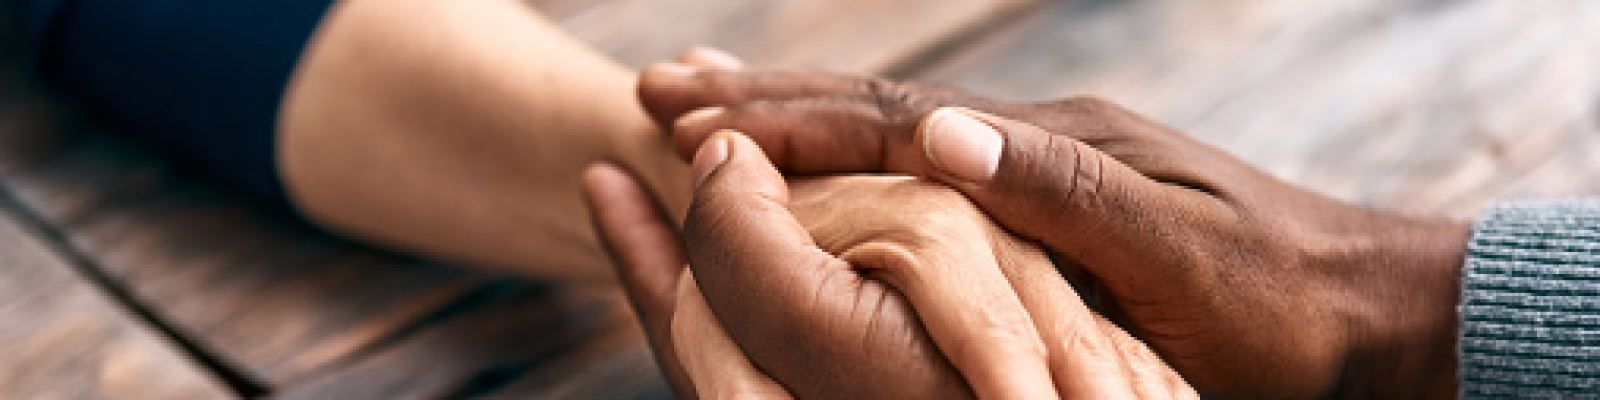 patient holding hands with loved one